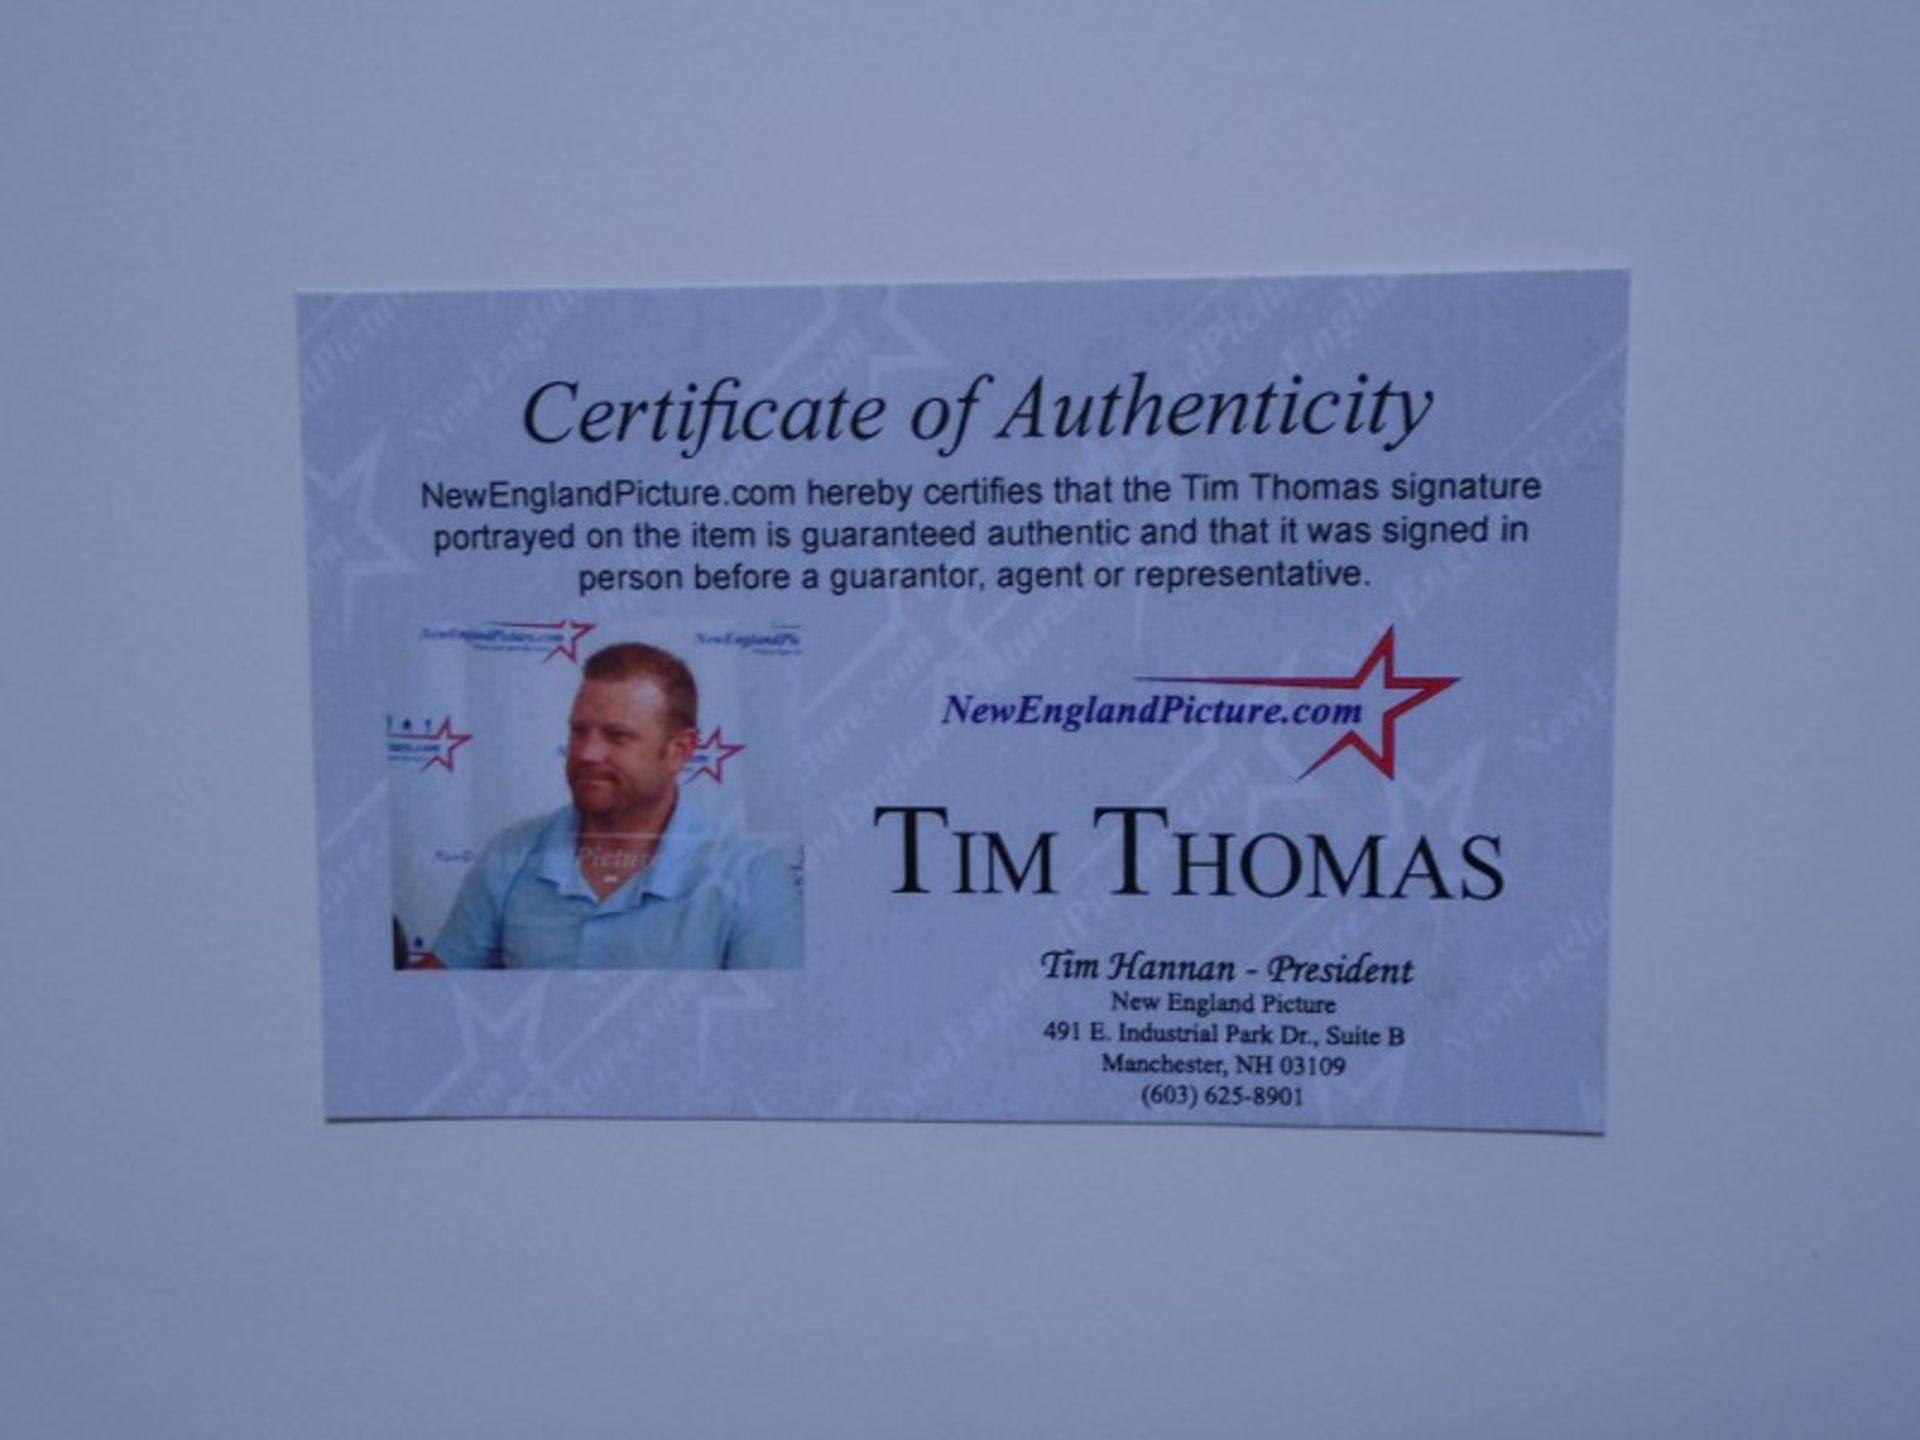 Tim Thomas - Signed Print in frame - Image 2 of 2